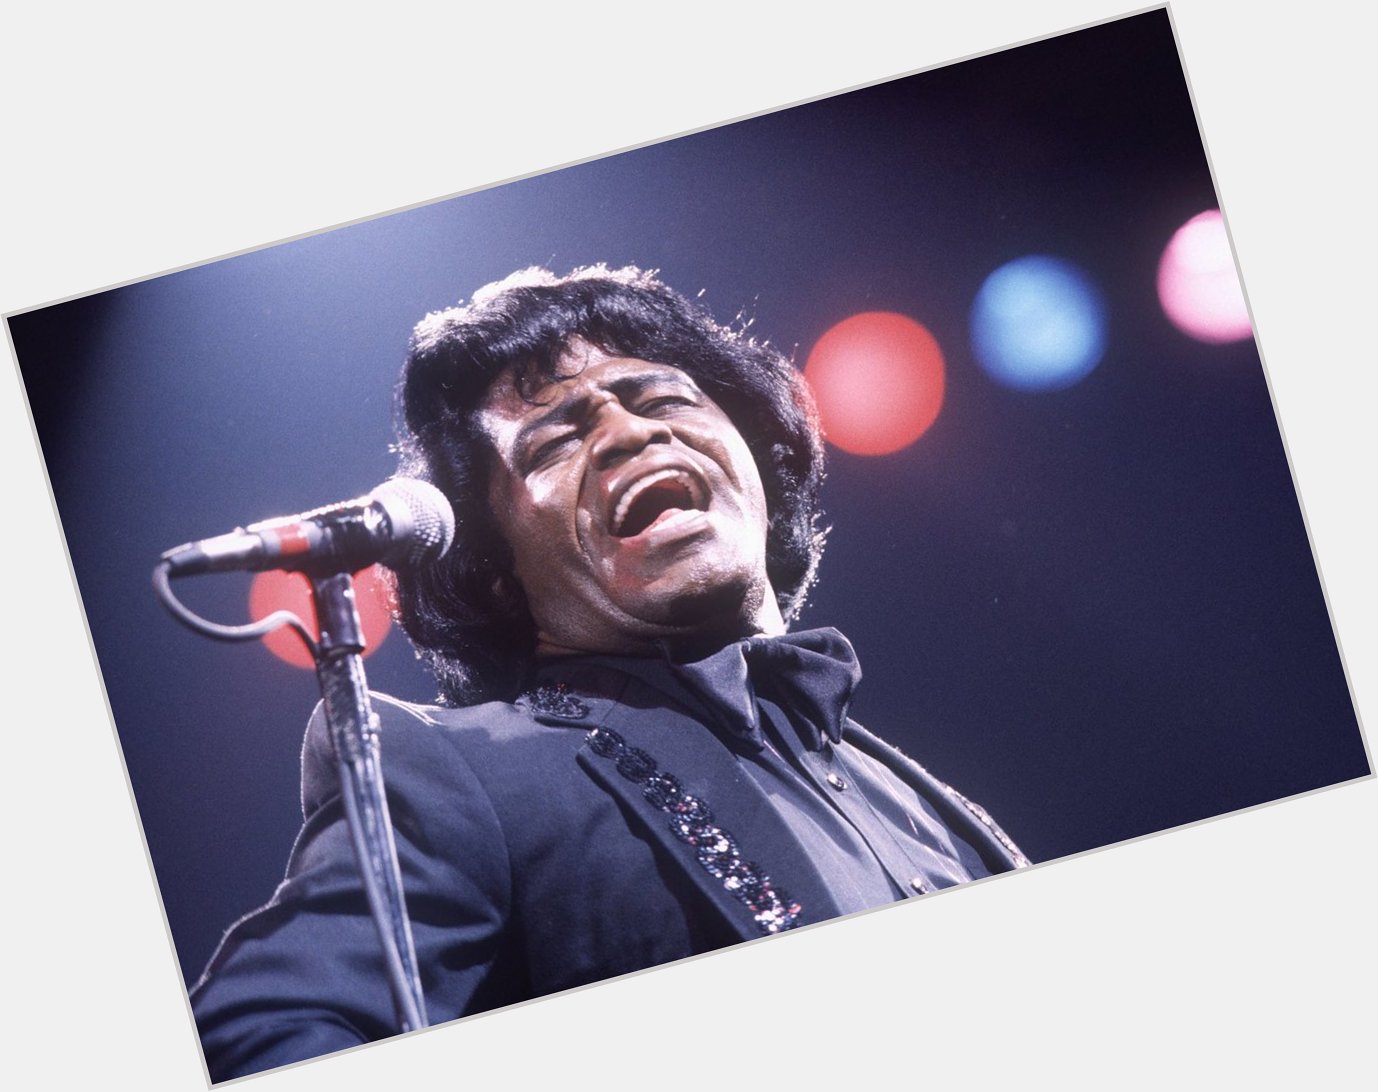 Get on up! Happy birthday to the Godfather of Soul, James Brown, who would be 85 today.  